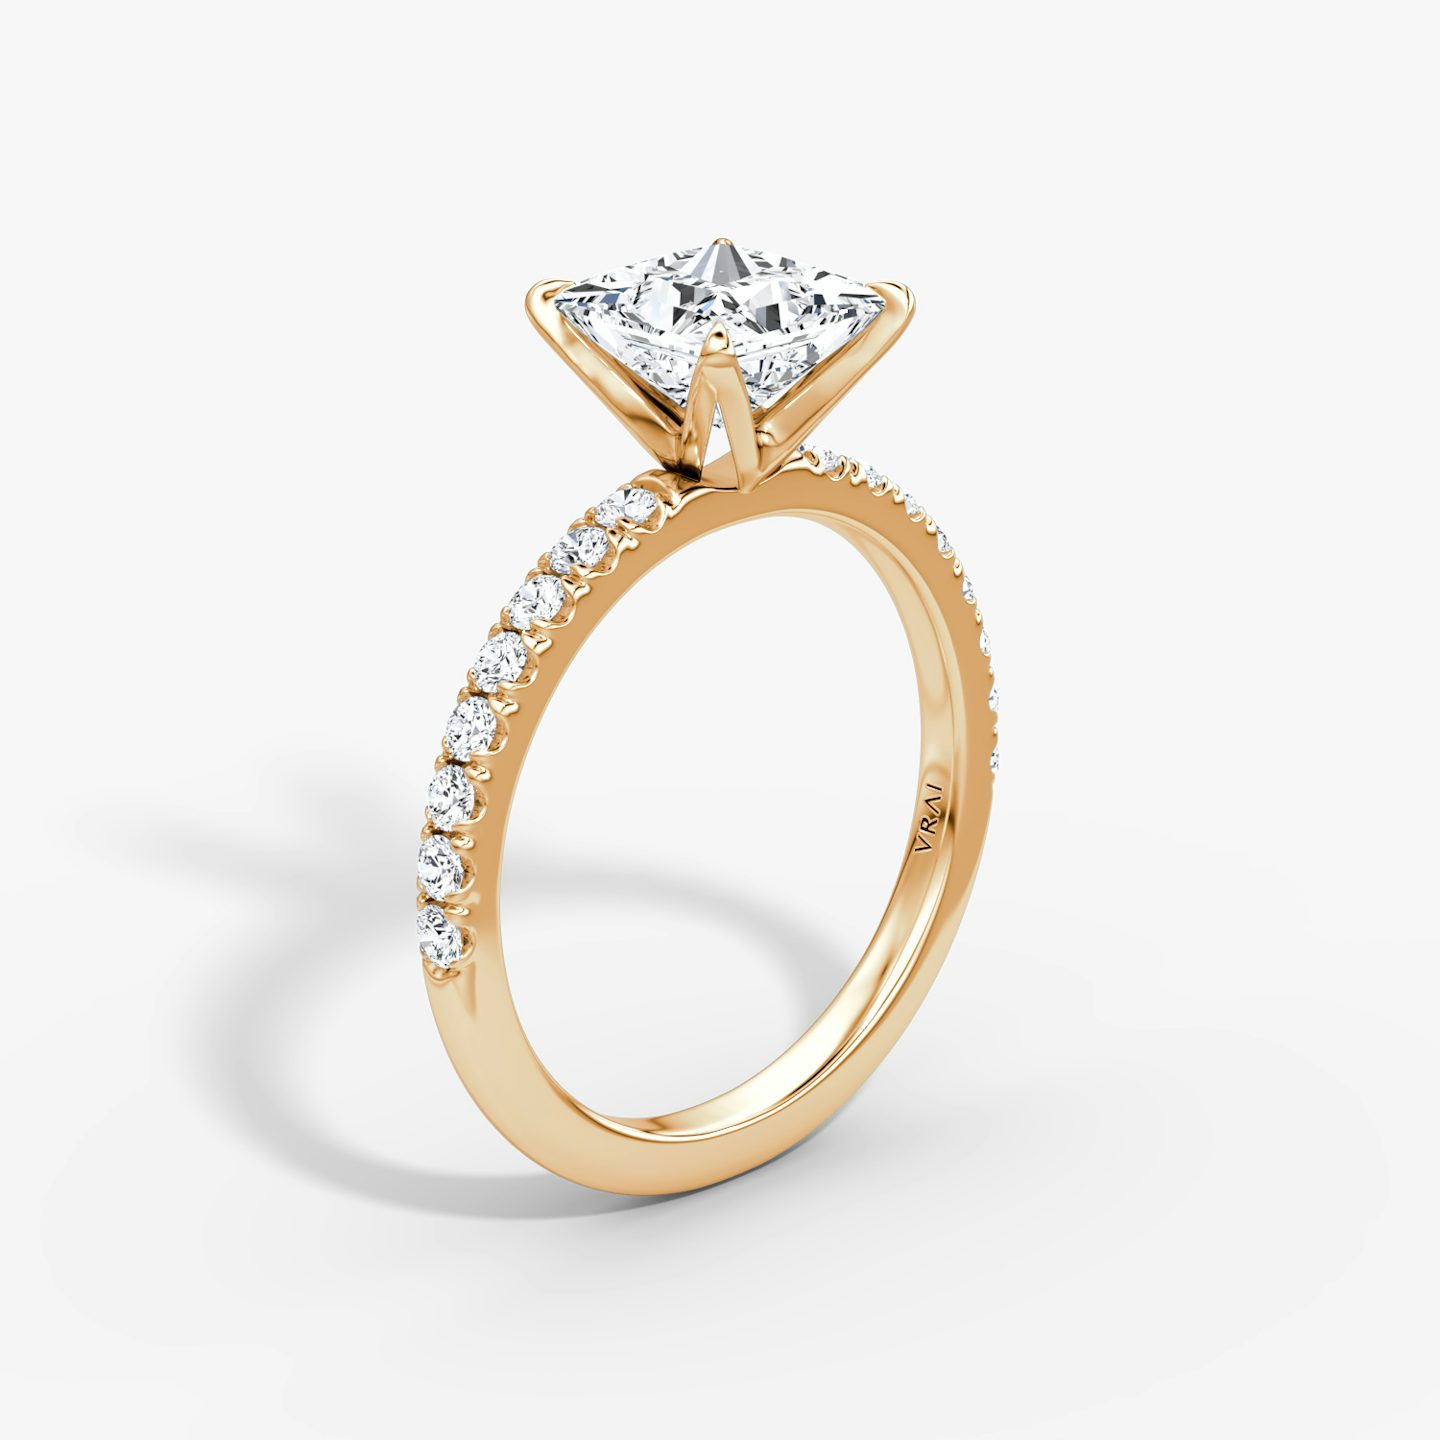 The V | Princess | 14k | 14k Rose Gold | Band: Pavé | Diamond orientation: vertical | Carat weight: See full inventory